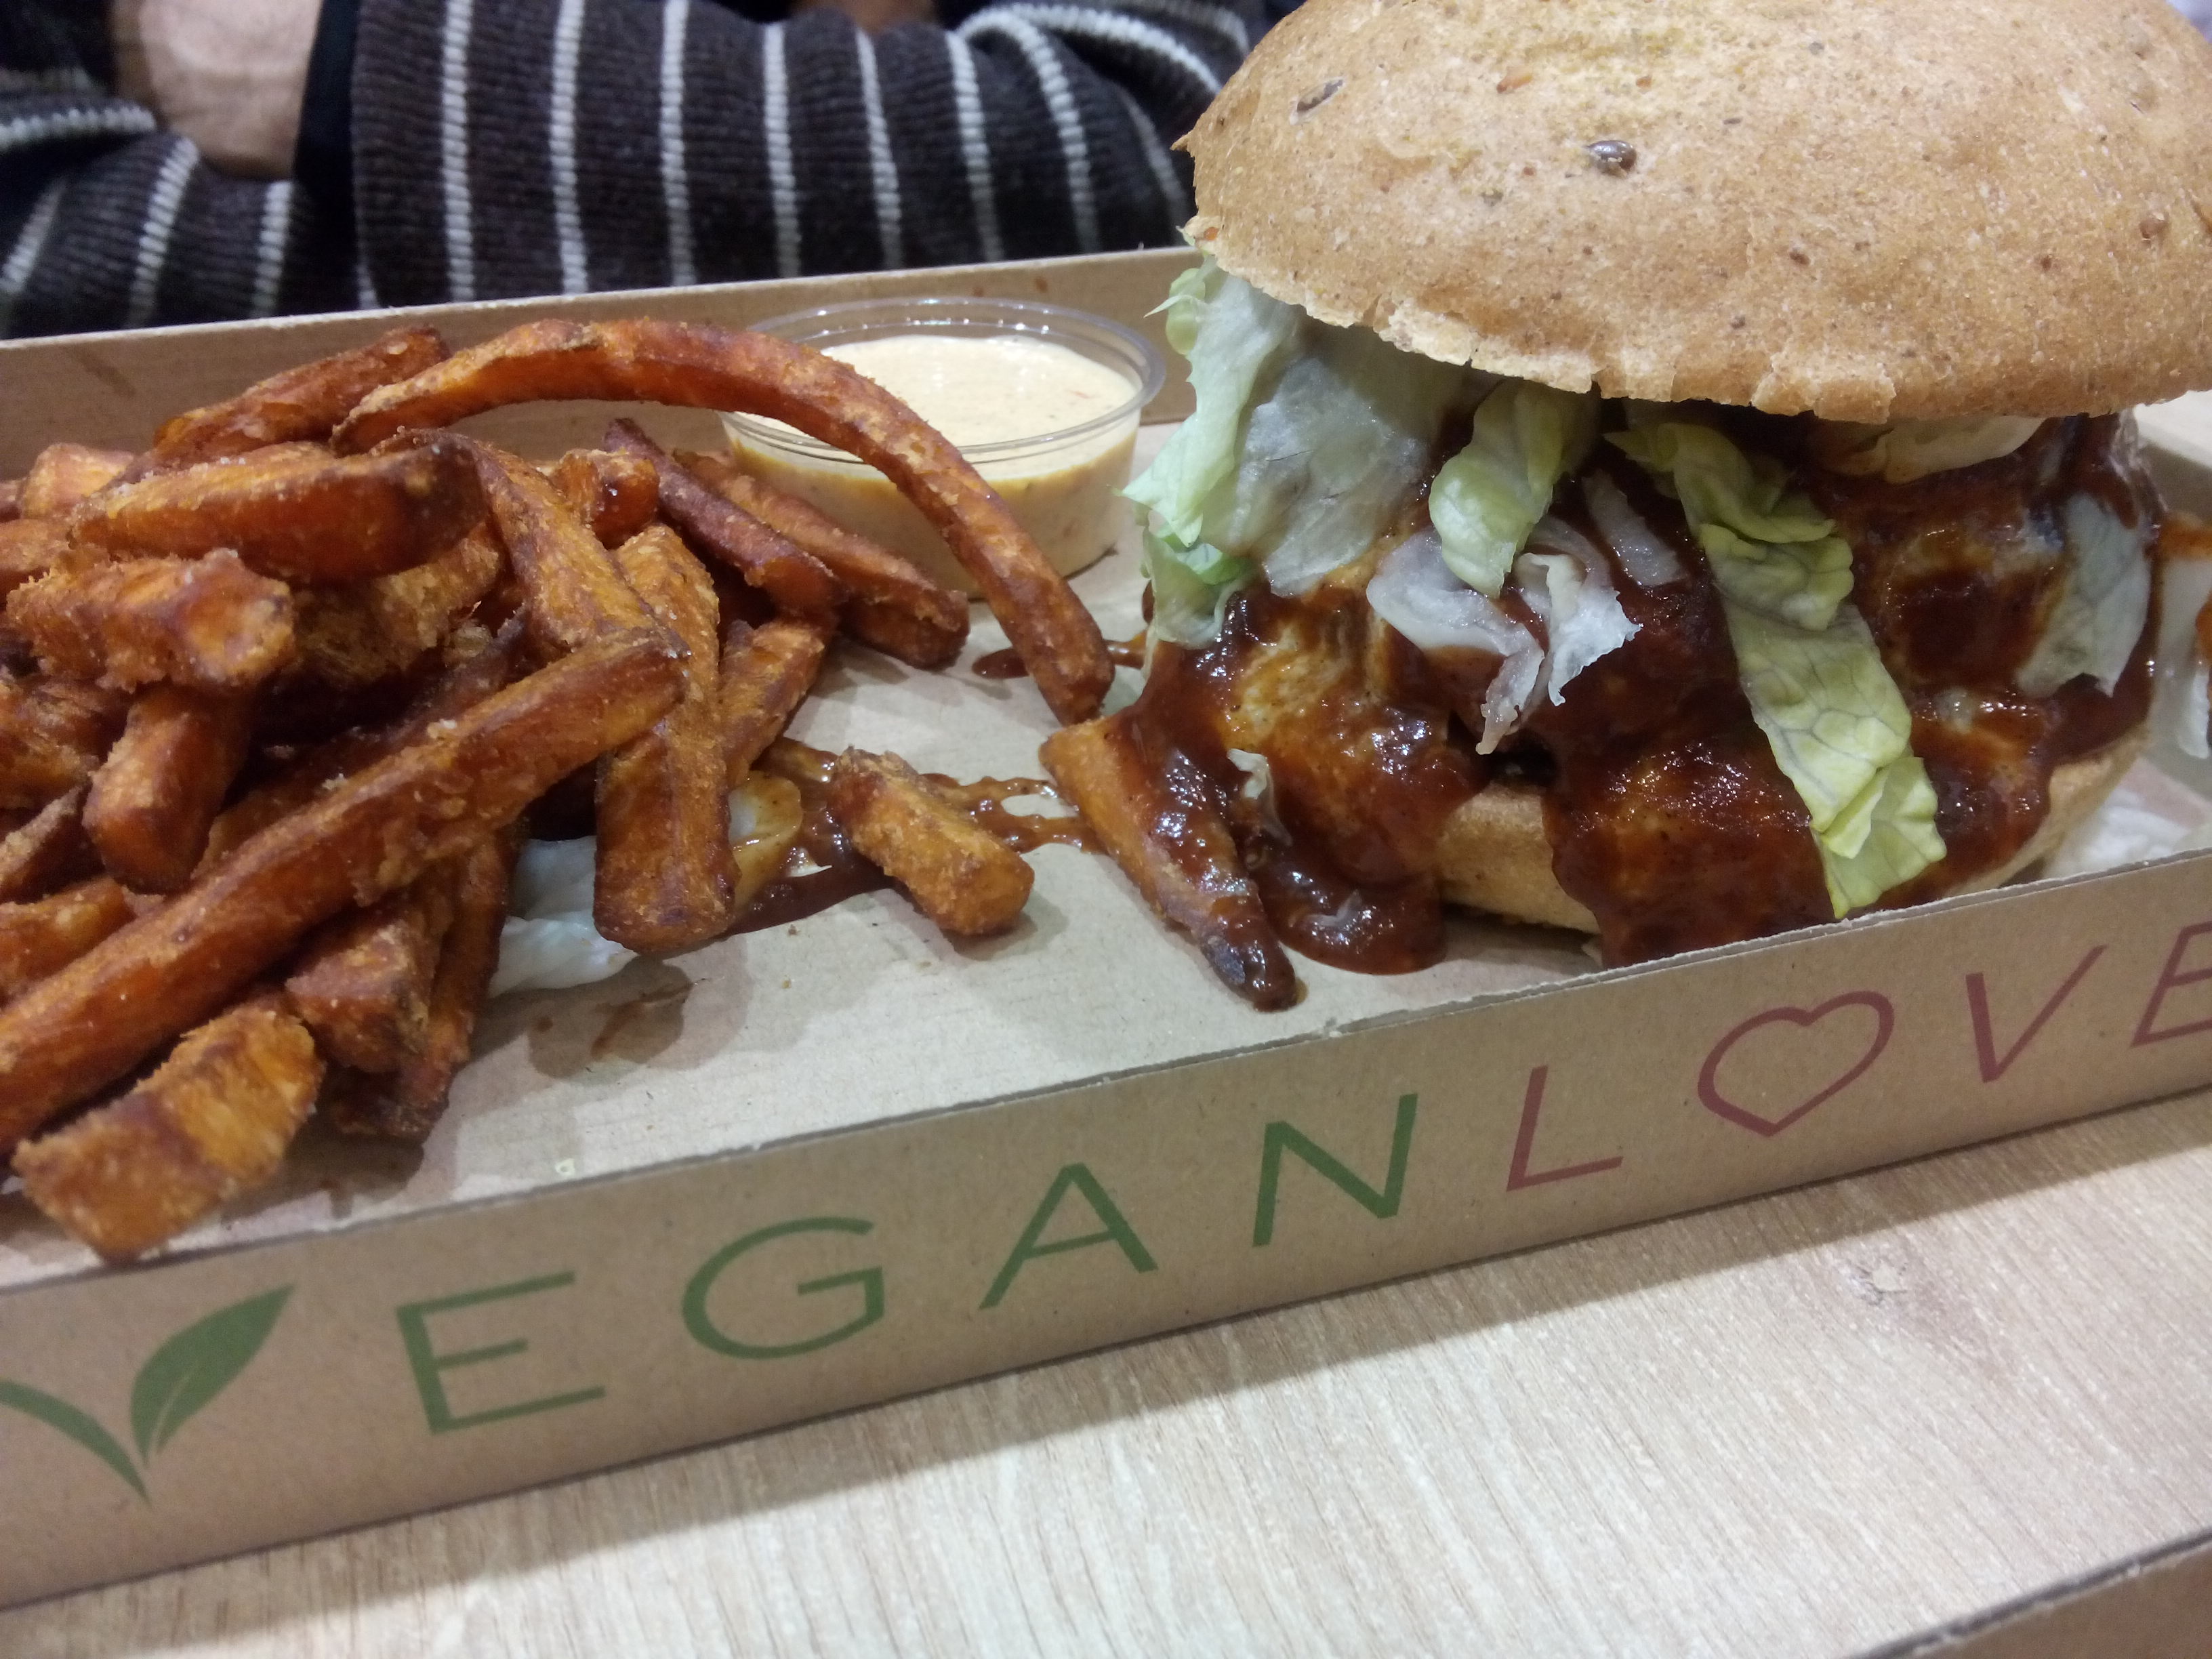 Sweet potatoe fries on one side of a cardboard tray and a sticky saucy salad-filled burger bun on the other